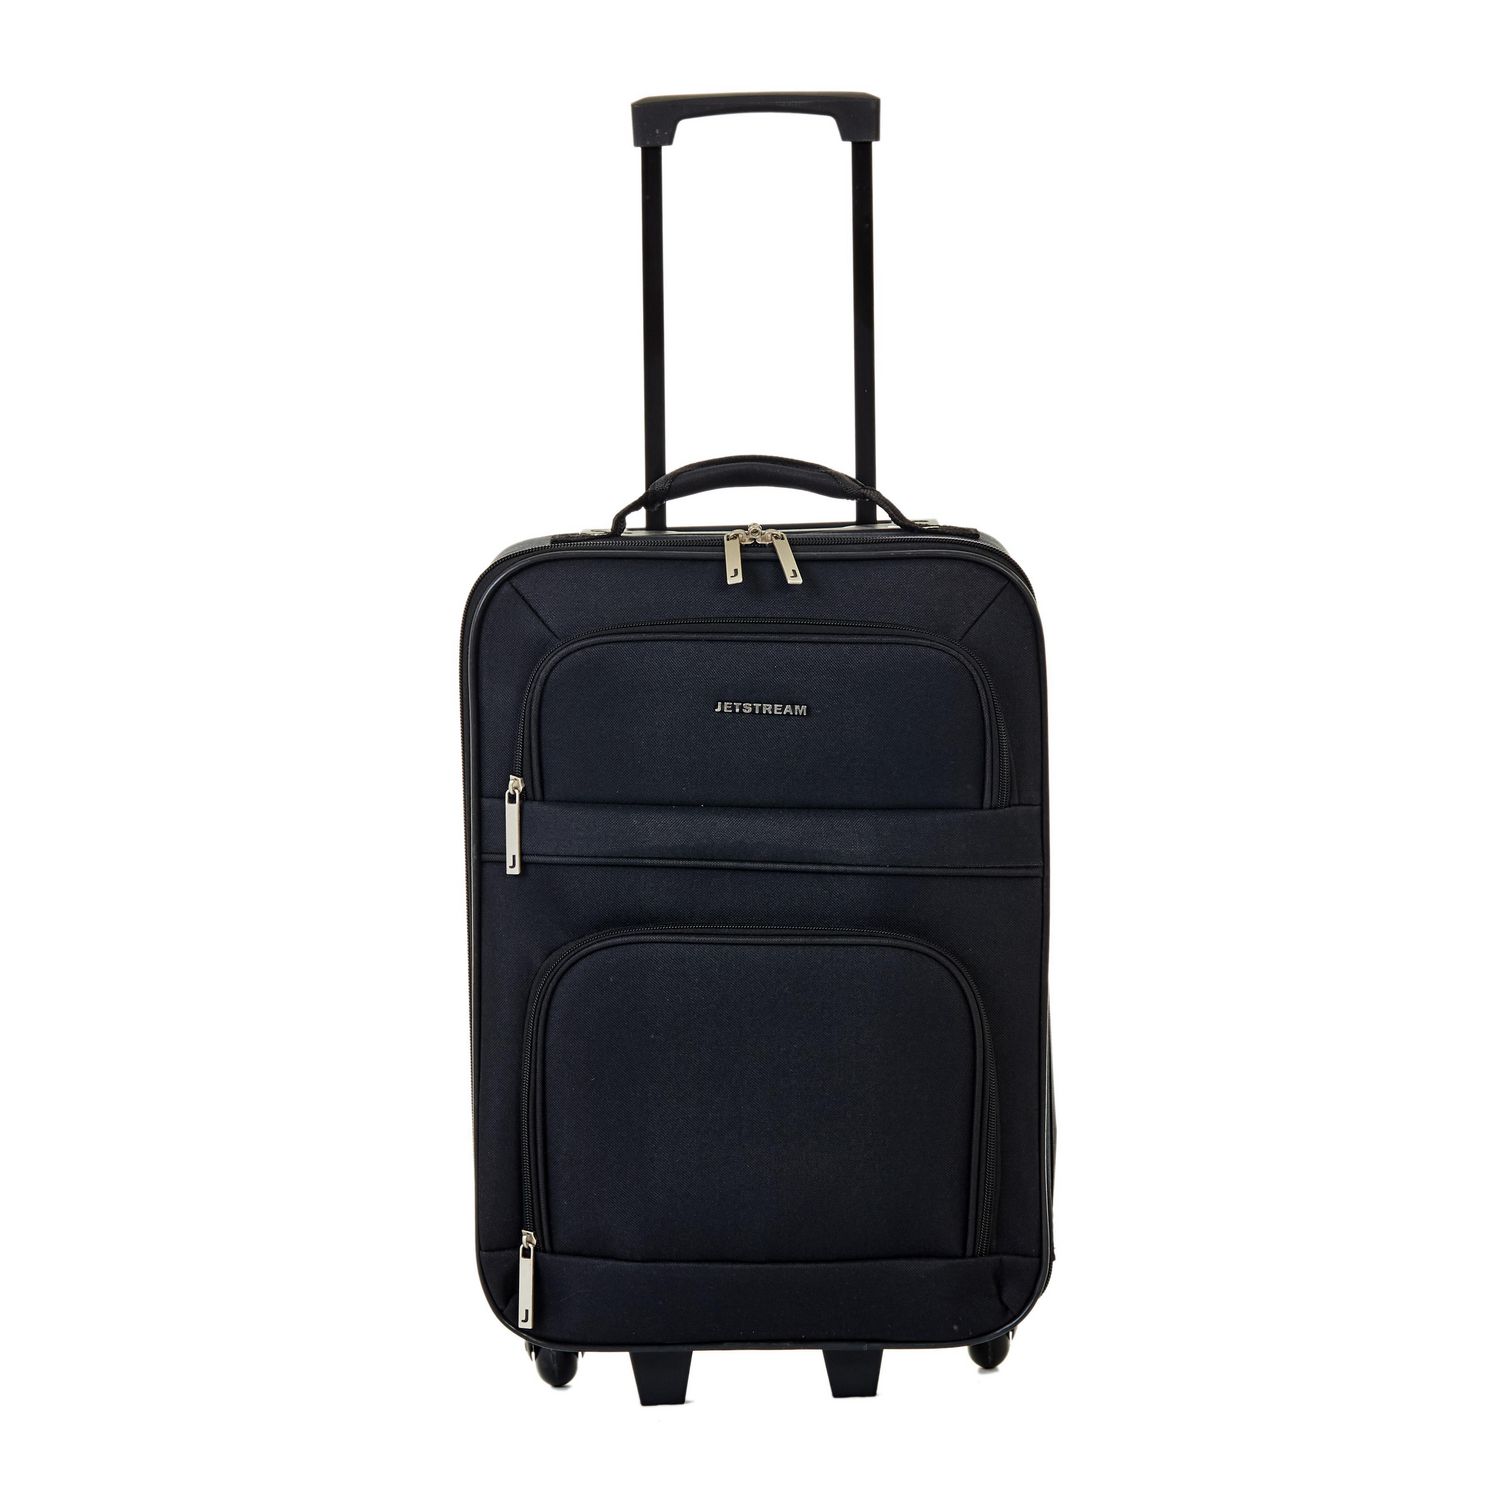 JetStream 18&quot; Upright Carry-on Luggage | Walmart Canada